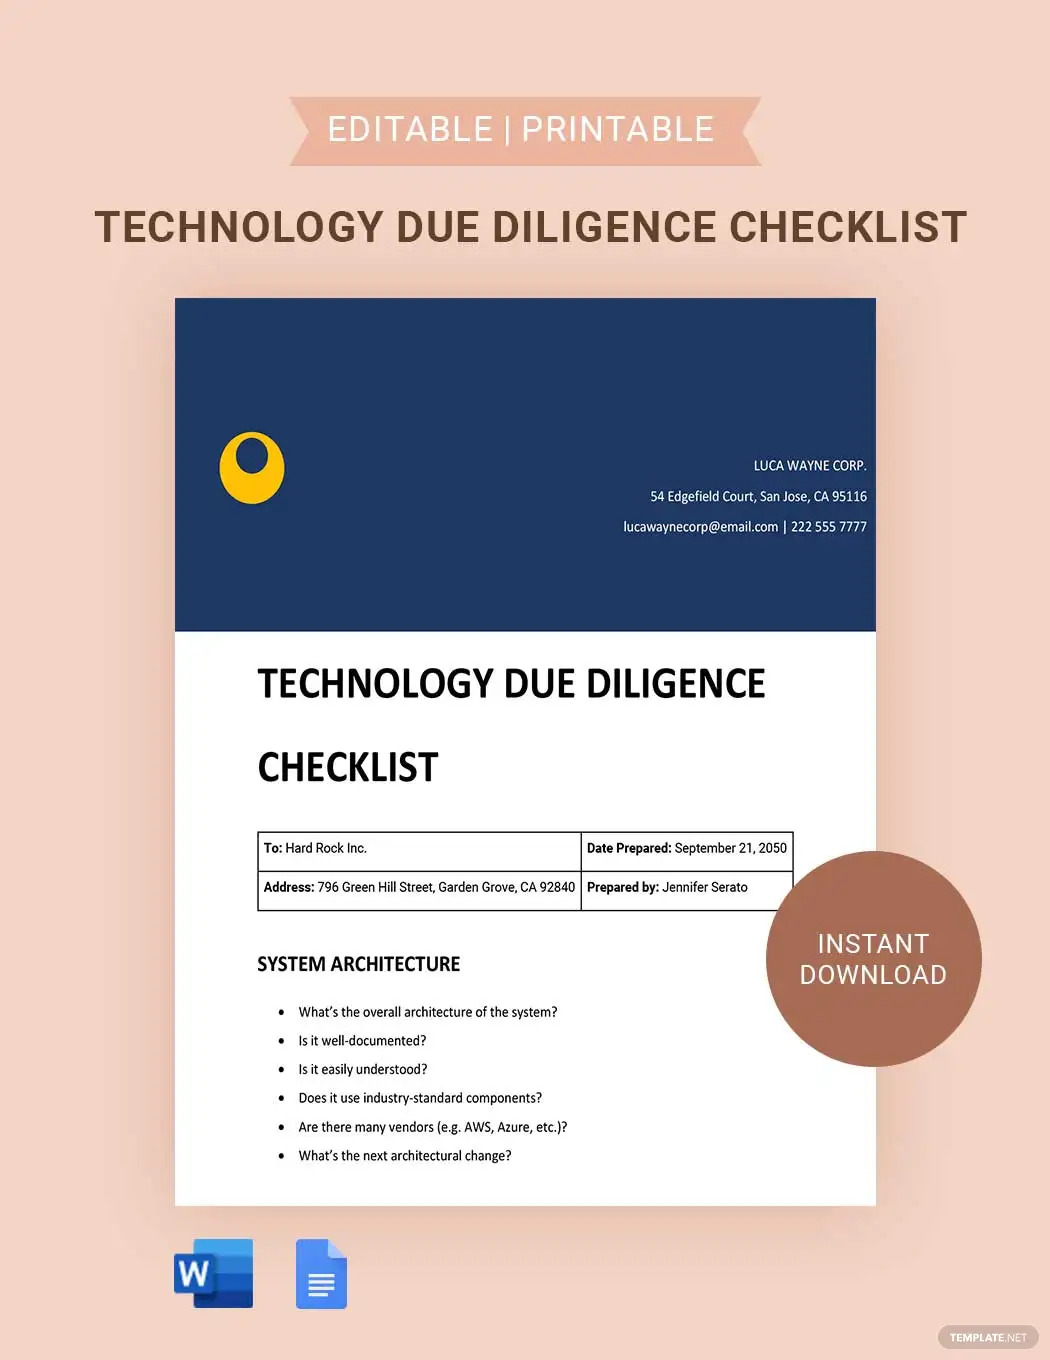 technology due diligence ideas and examples